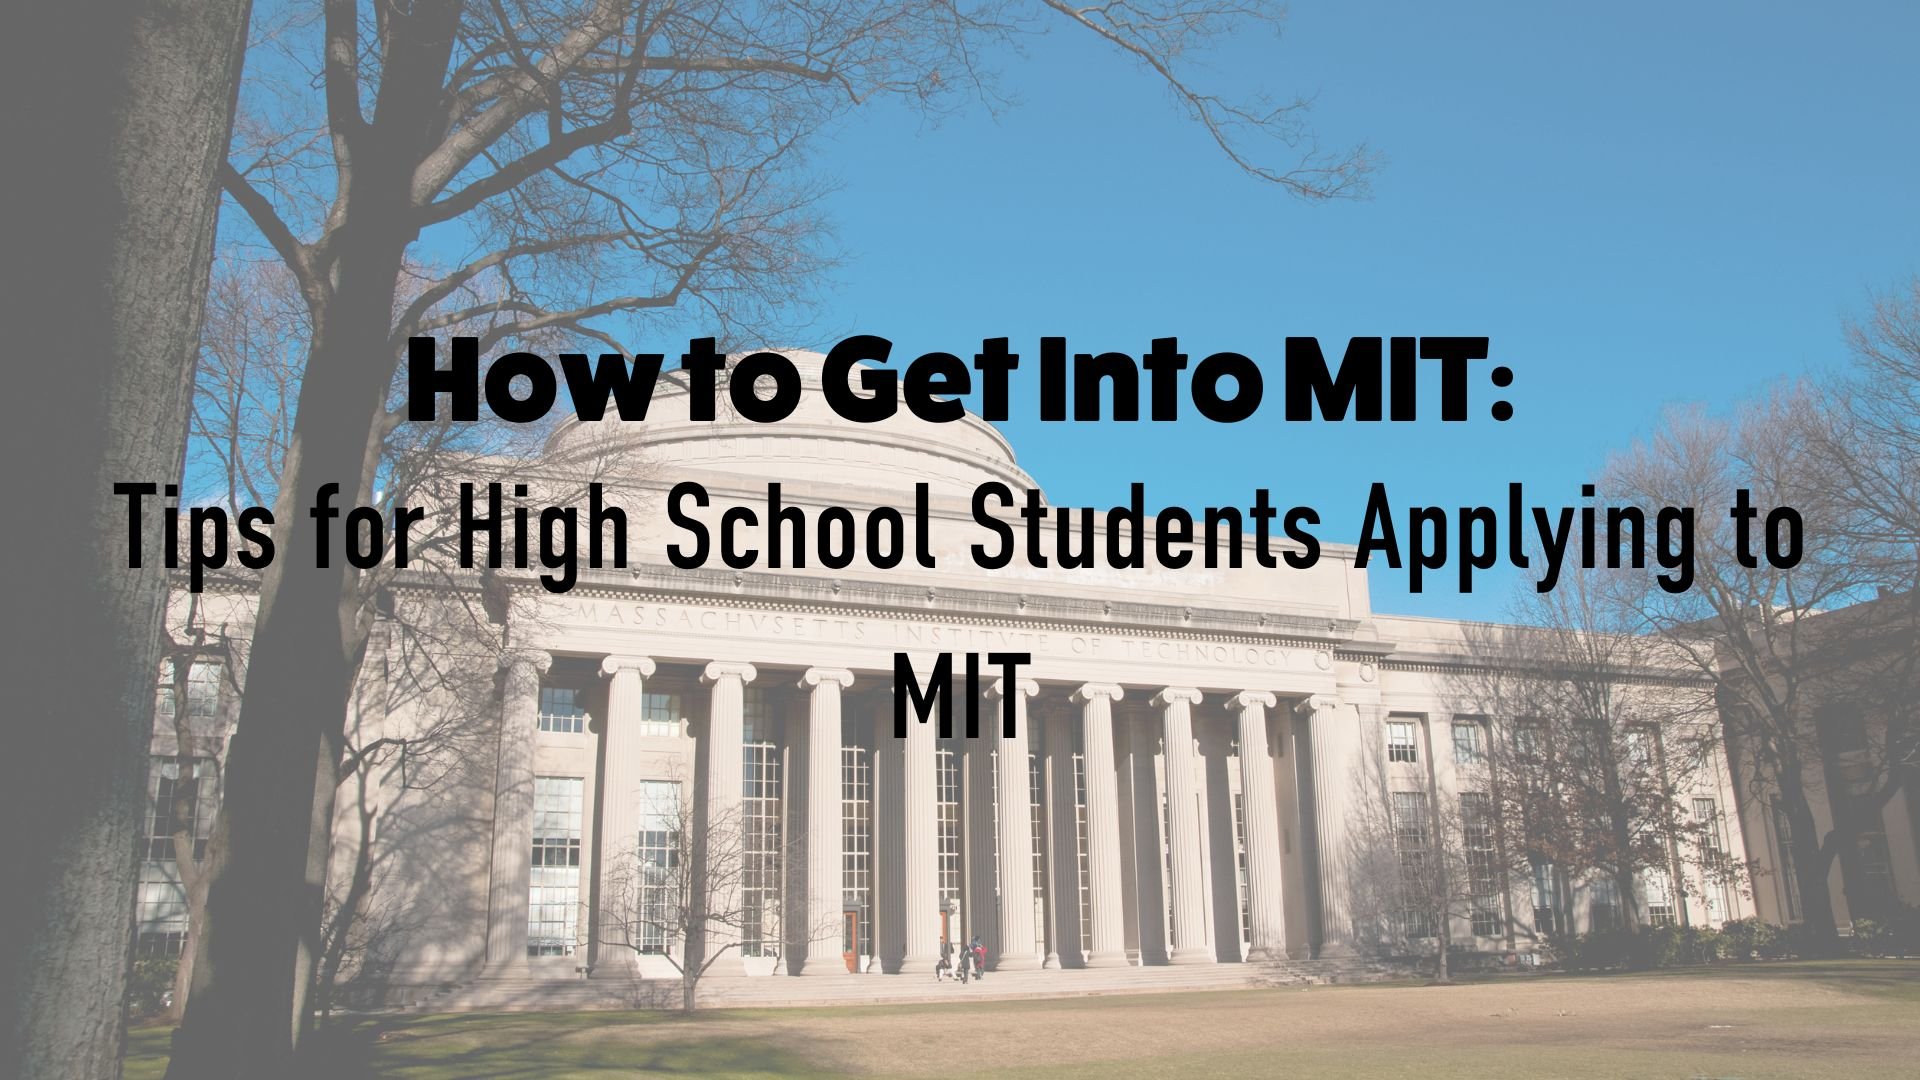 Can a normal student get into MIT?